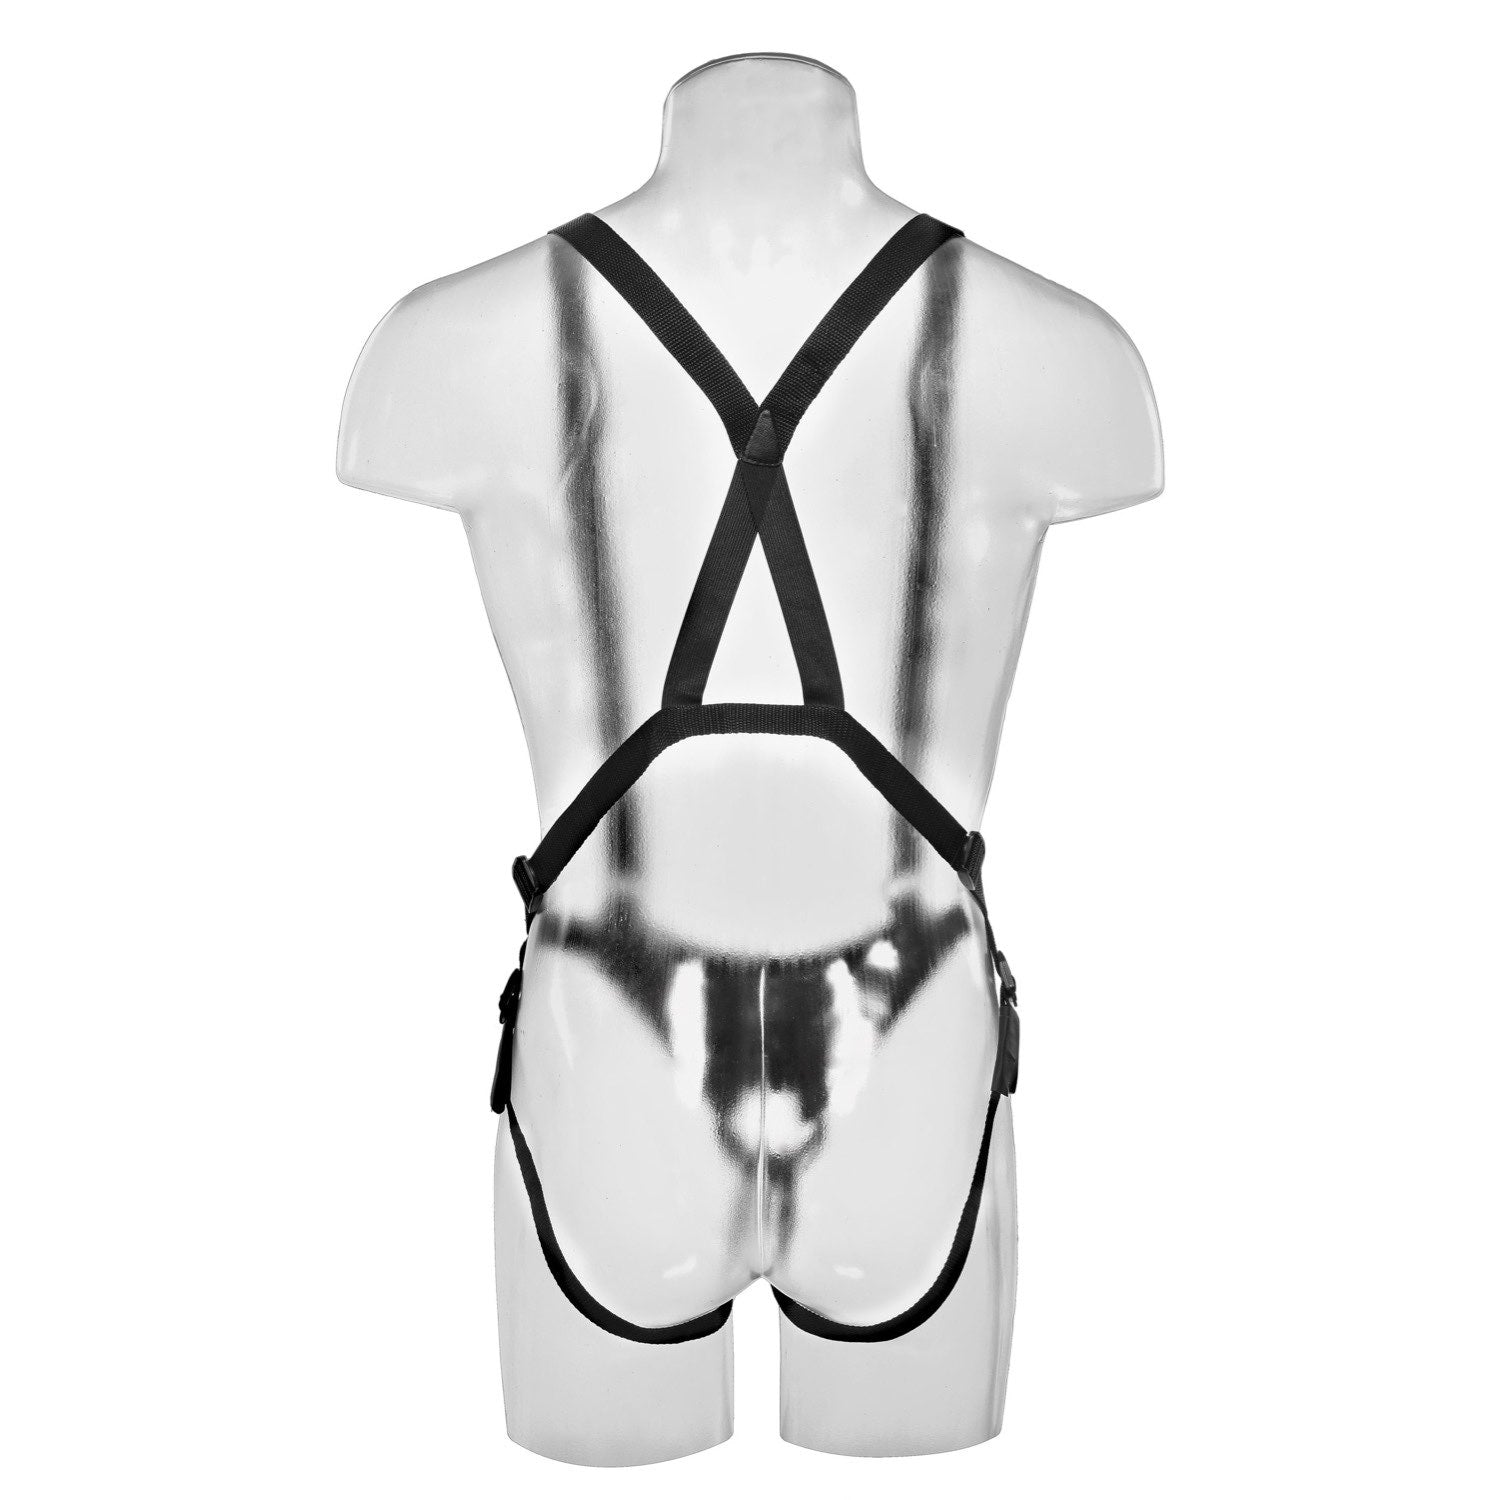 King Cock 10&quot; Hollow Strap-On Suspender System - Flesh 25.4 cm Hollow Strap-On with Suspender Harness by Pipedream